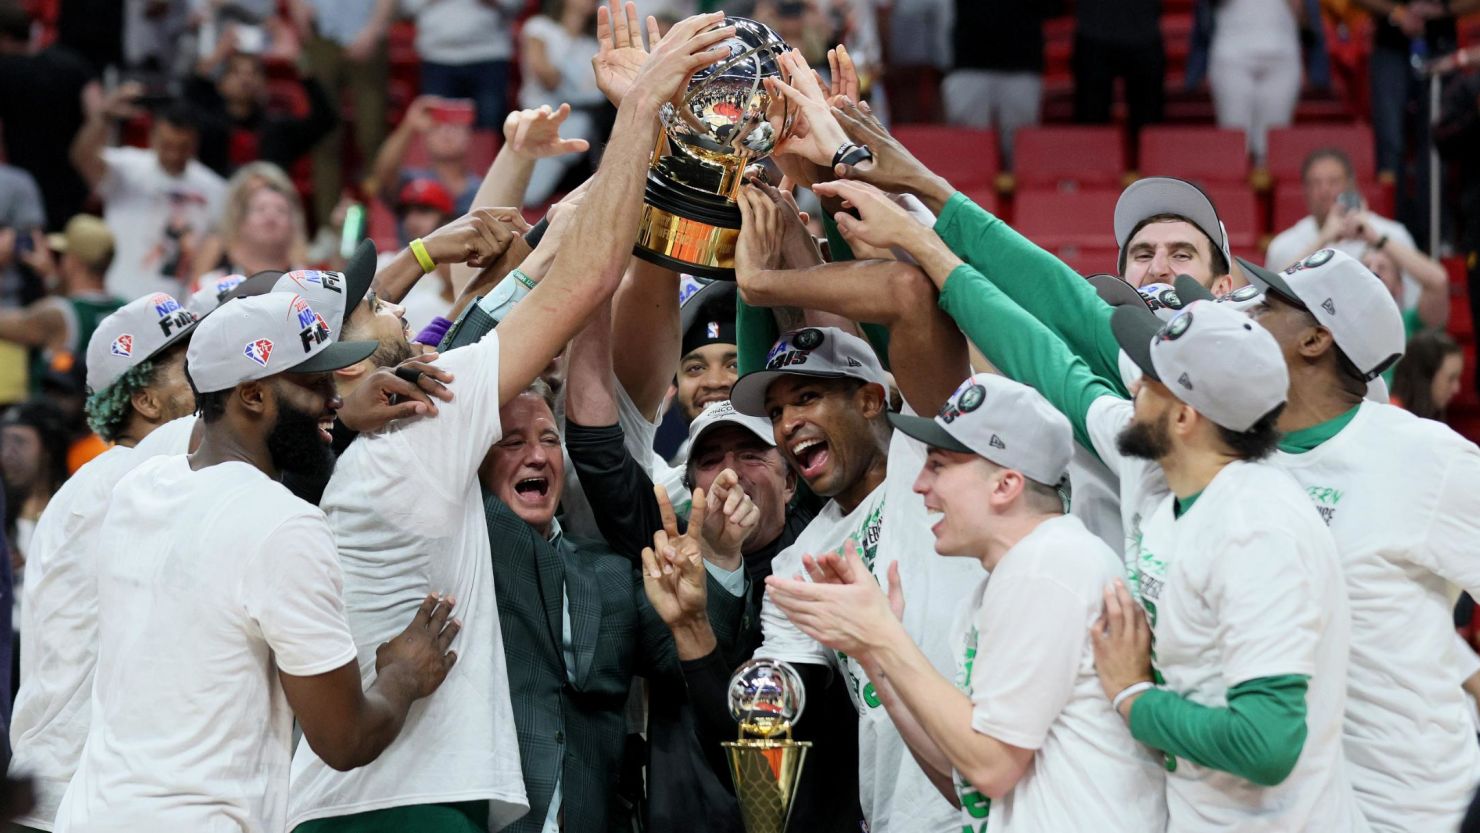 The Boston Celtics hoist the Eastern Conference Finals trophy after a Game 7 win in Miami.